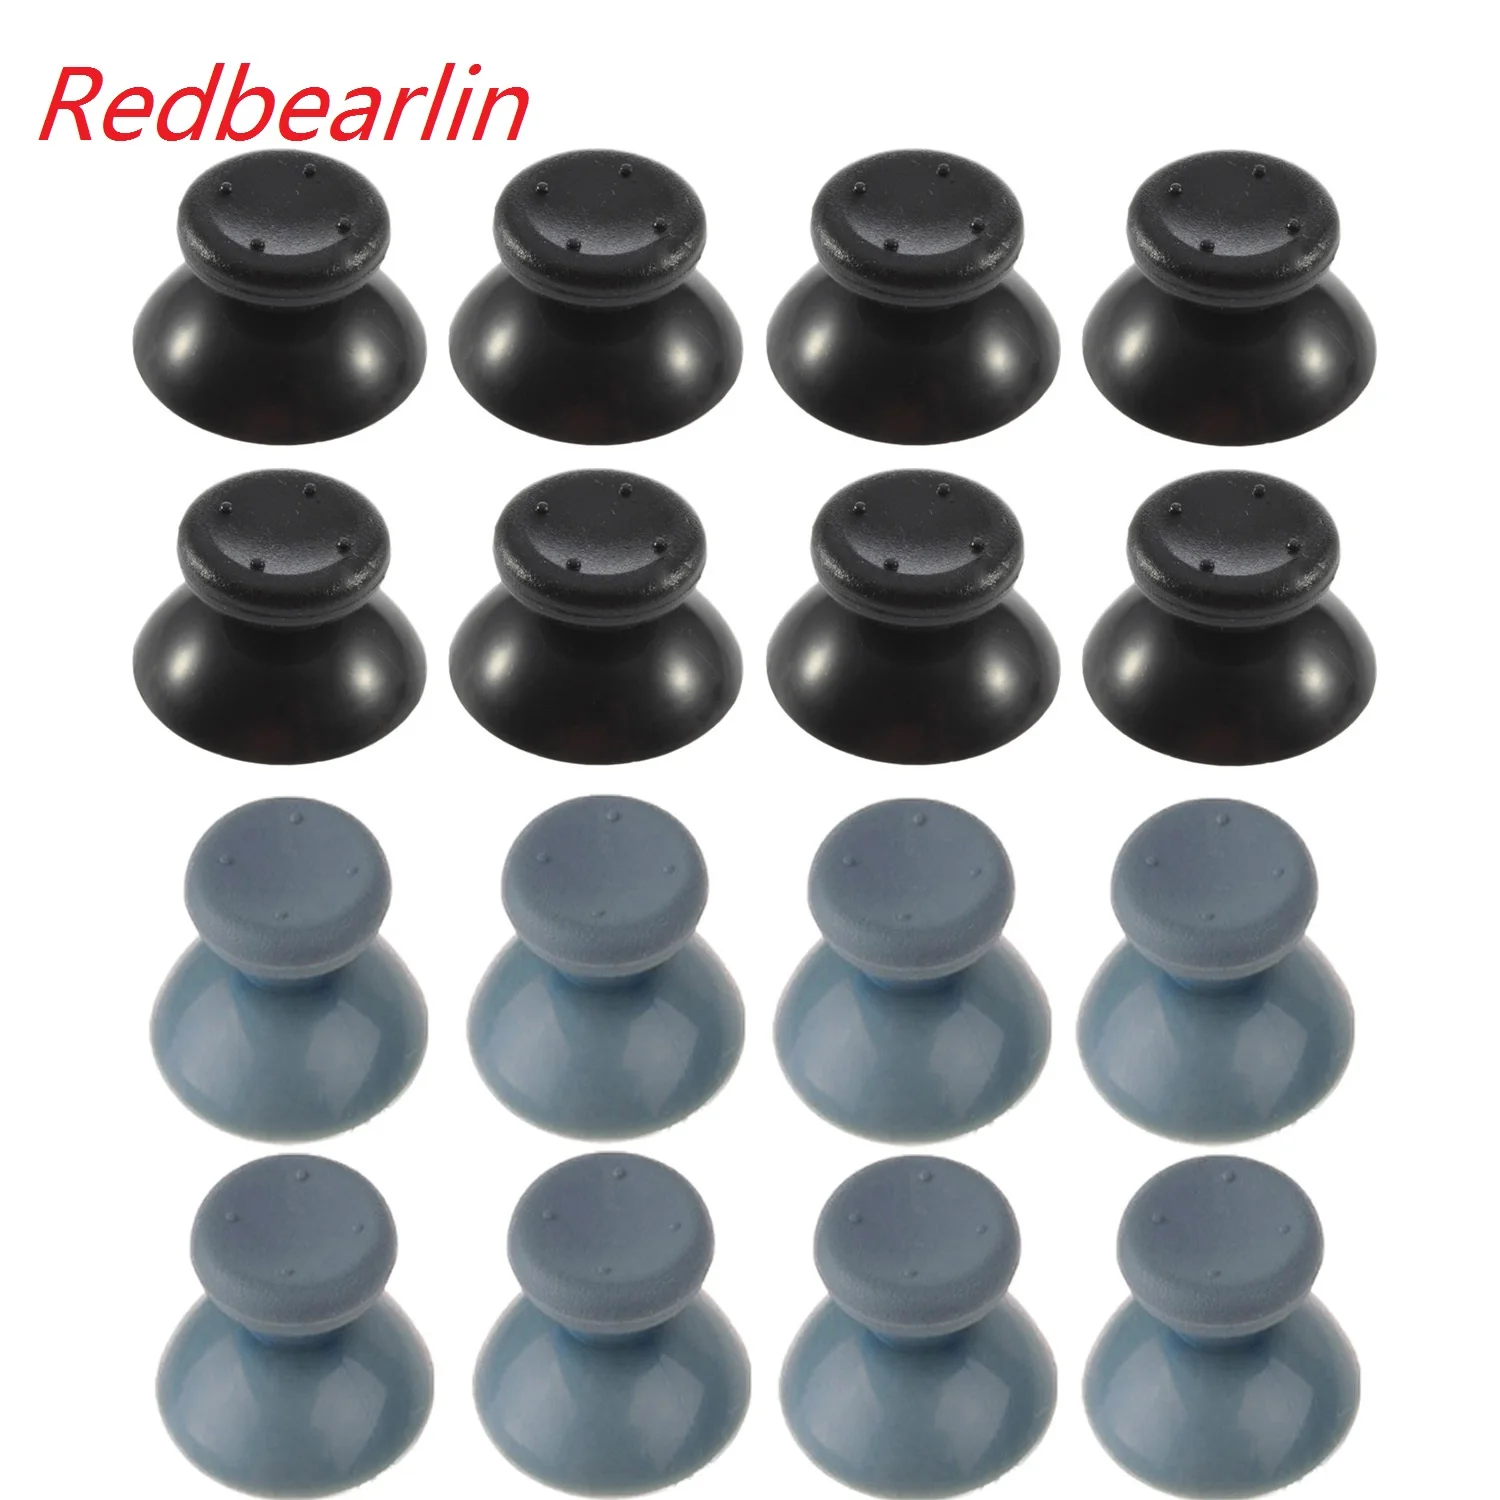 

200pcs Replacement Controller Analog Thumbstick Thumb Stick Mushroom Grip Cap Cover for MicroSoft XBOX 360 XBOX360 Controller